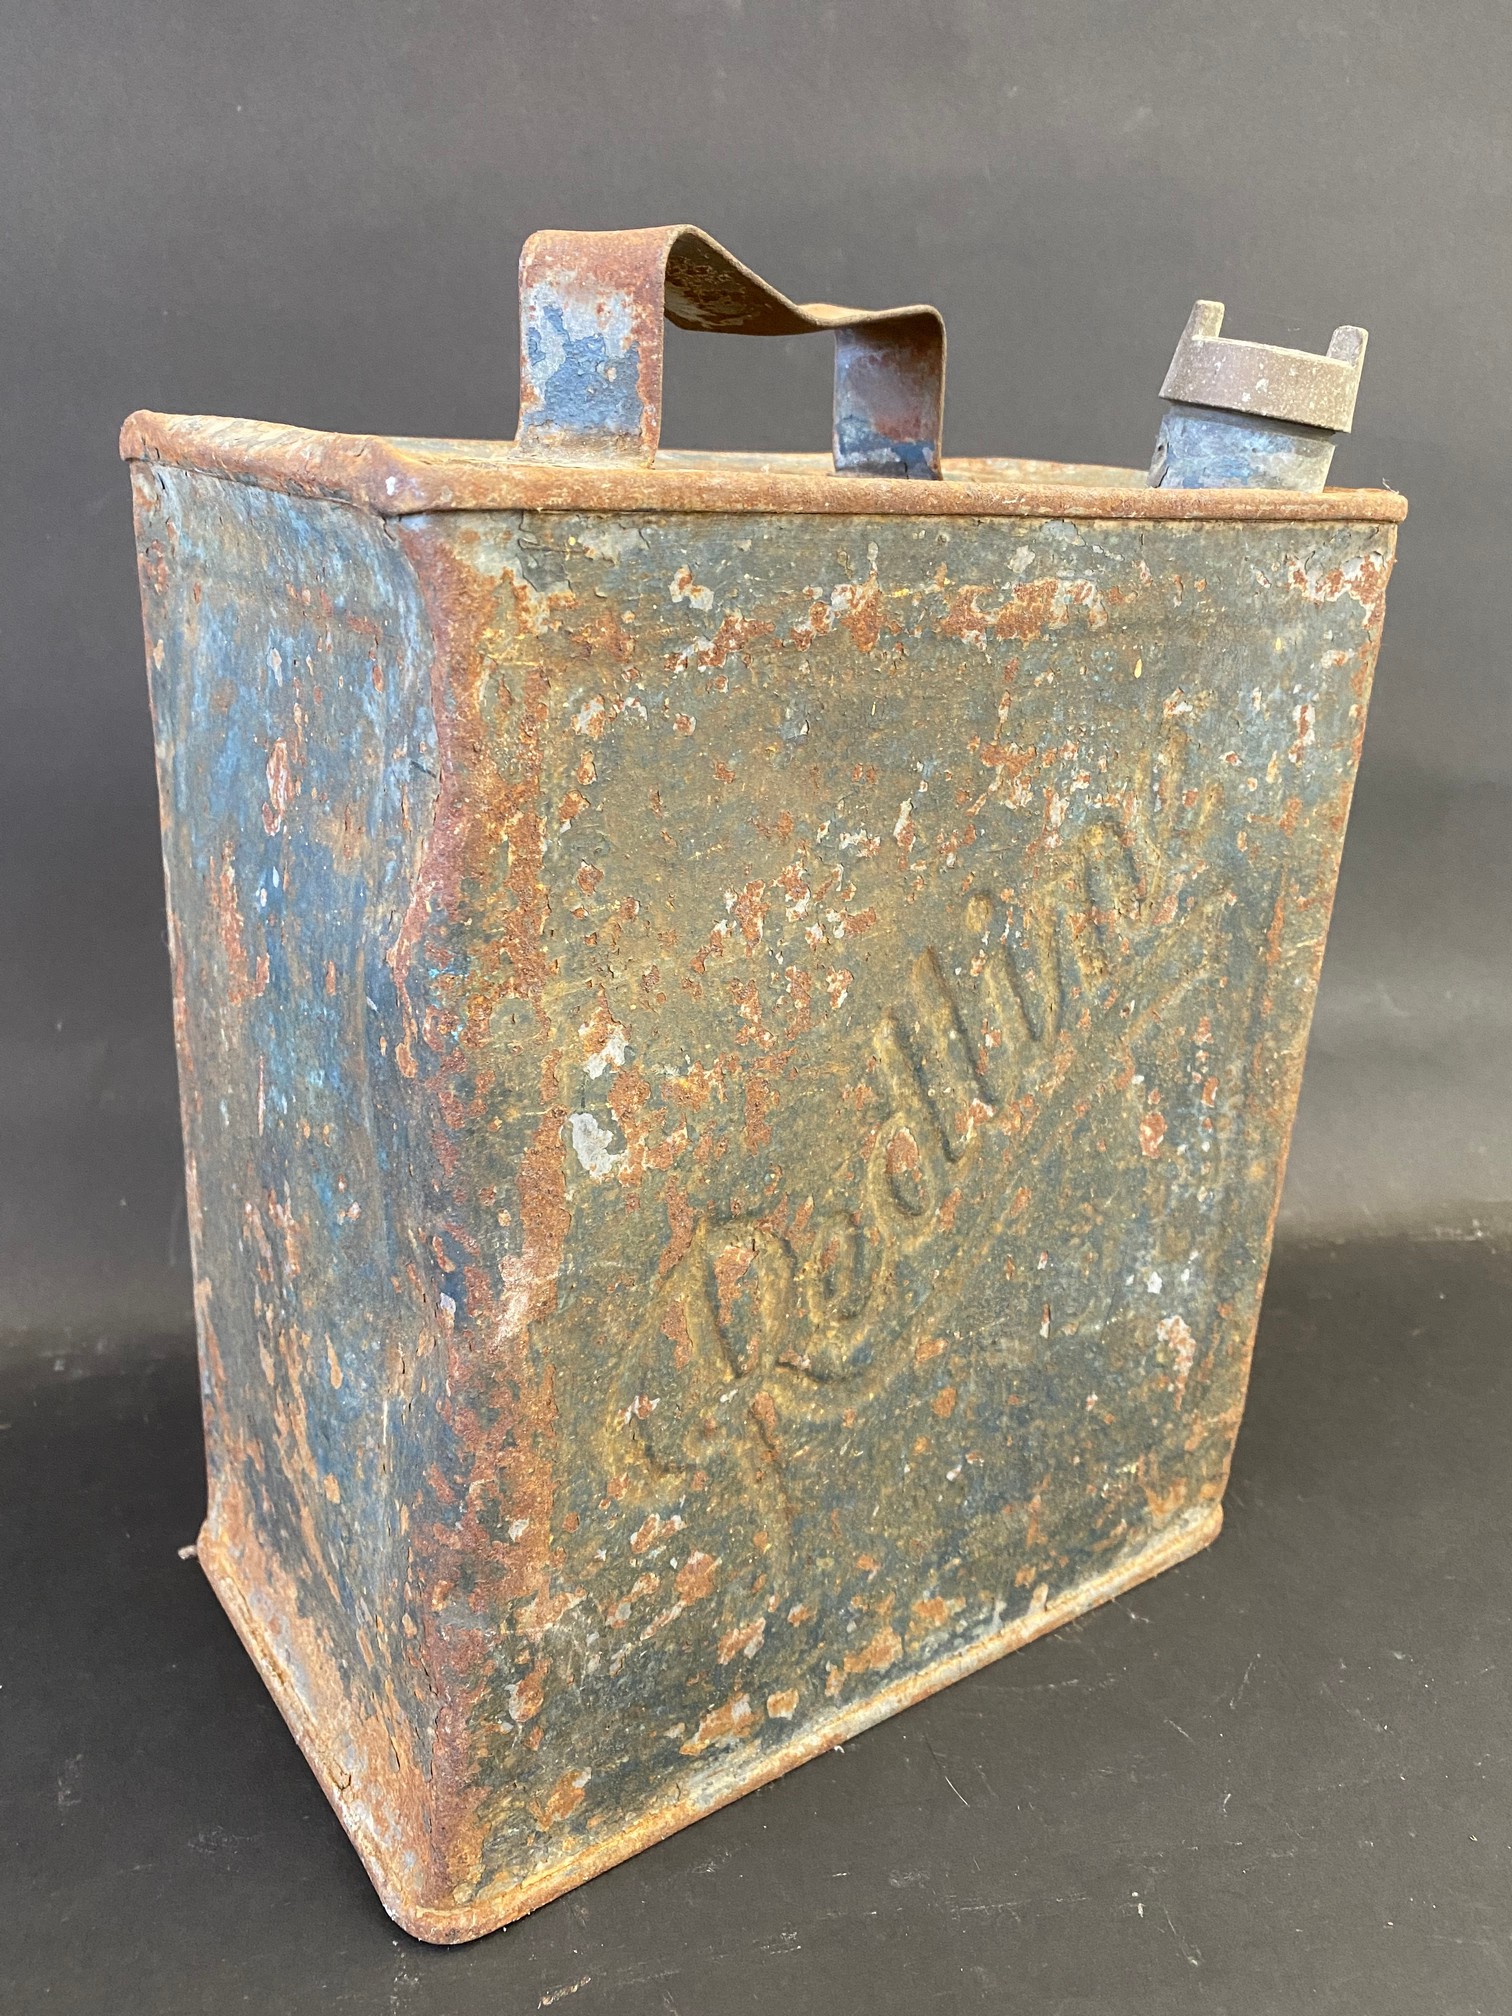 A Redline two gallon petrol can by Valor, indistinctly dated April 1921, in original condition and - Image 2 of 4